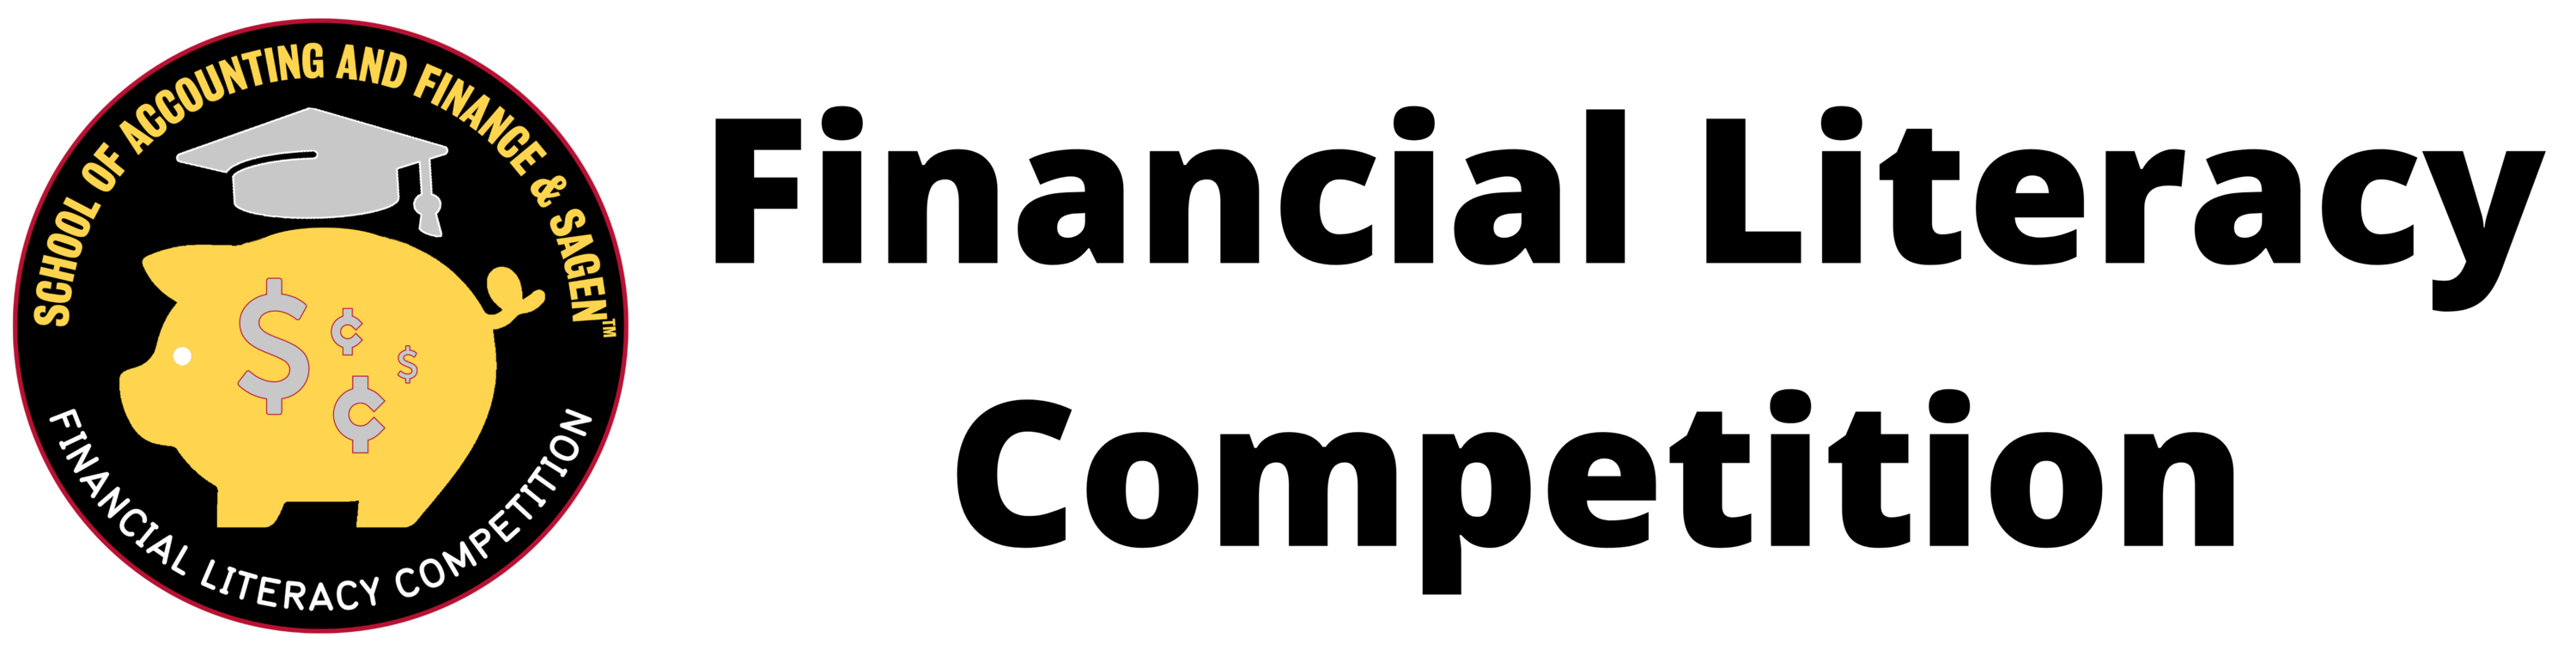 Piggy bank logo with text reading "School of Accounting and Finance Financial Literacy Competition"